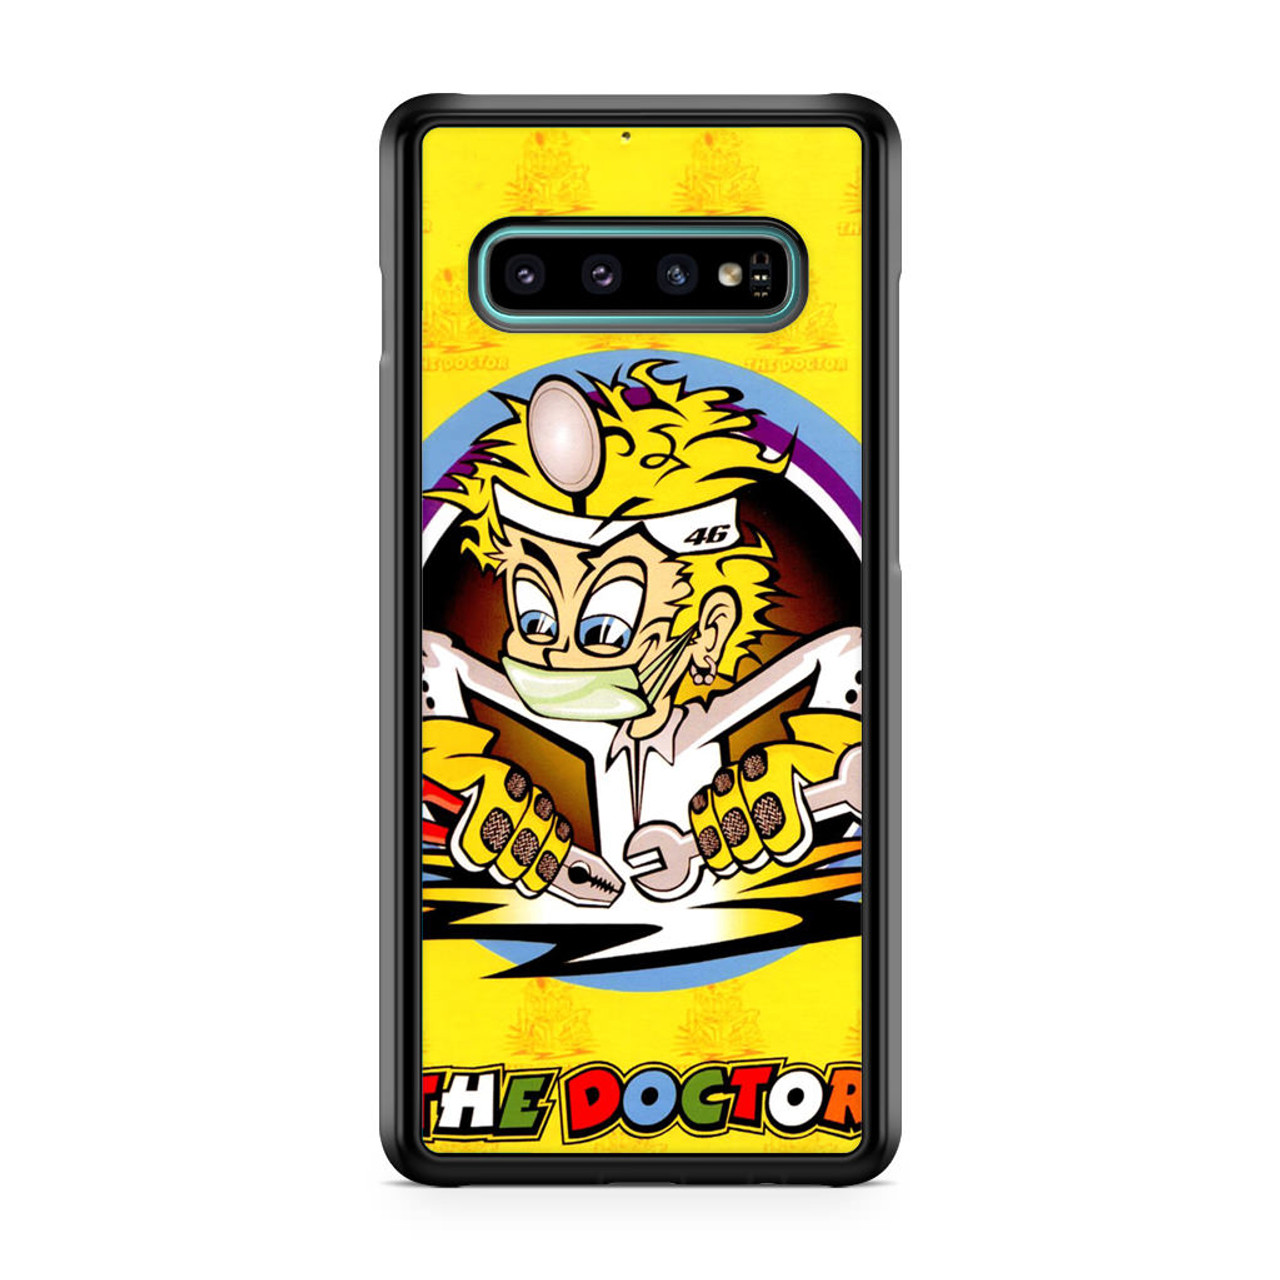 Lake Taupo tilgive Bølle Valentino Rossi The Doctor Samsung Galaxy S10 Plus Case - Jocases